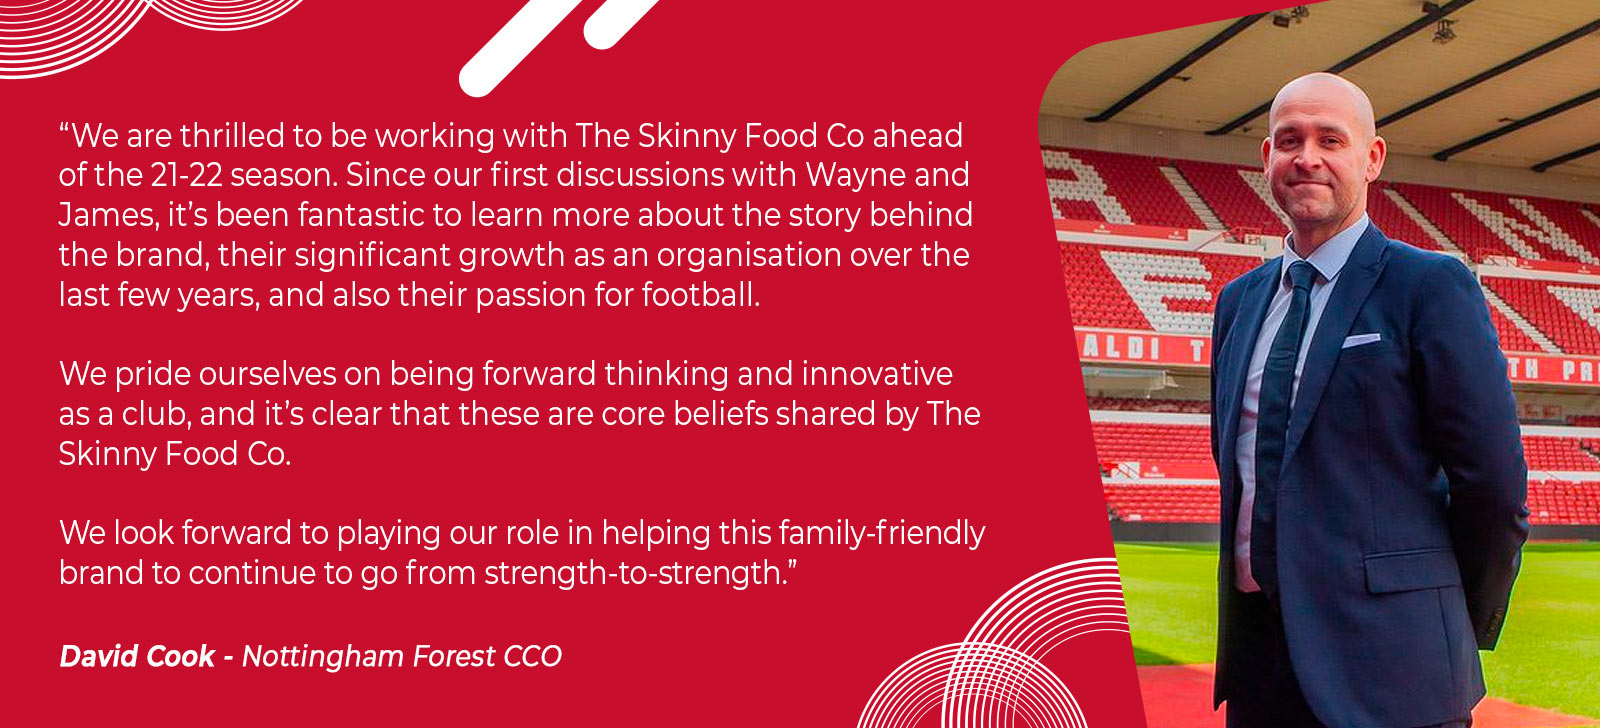 David Cook Sponsorship with Nottingham Forest Football Club